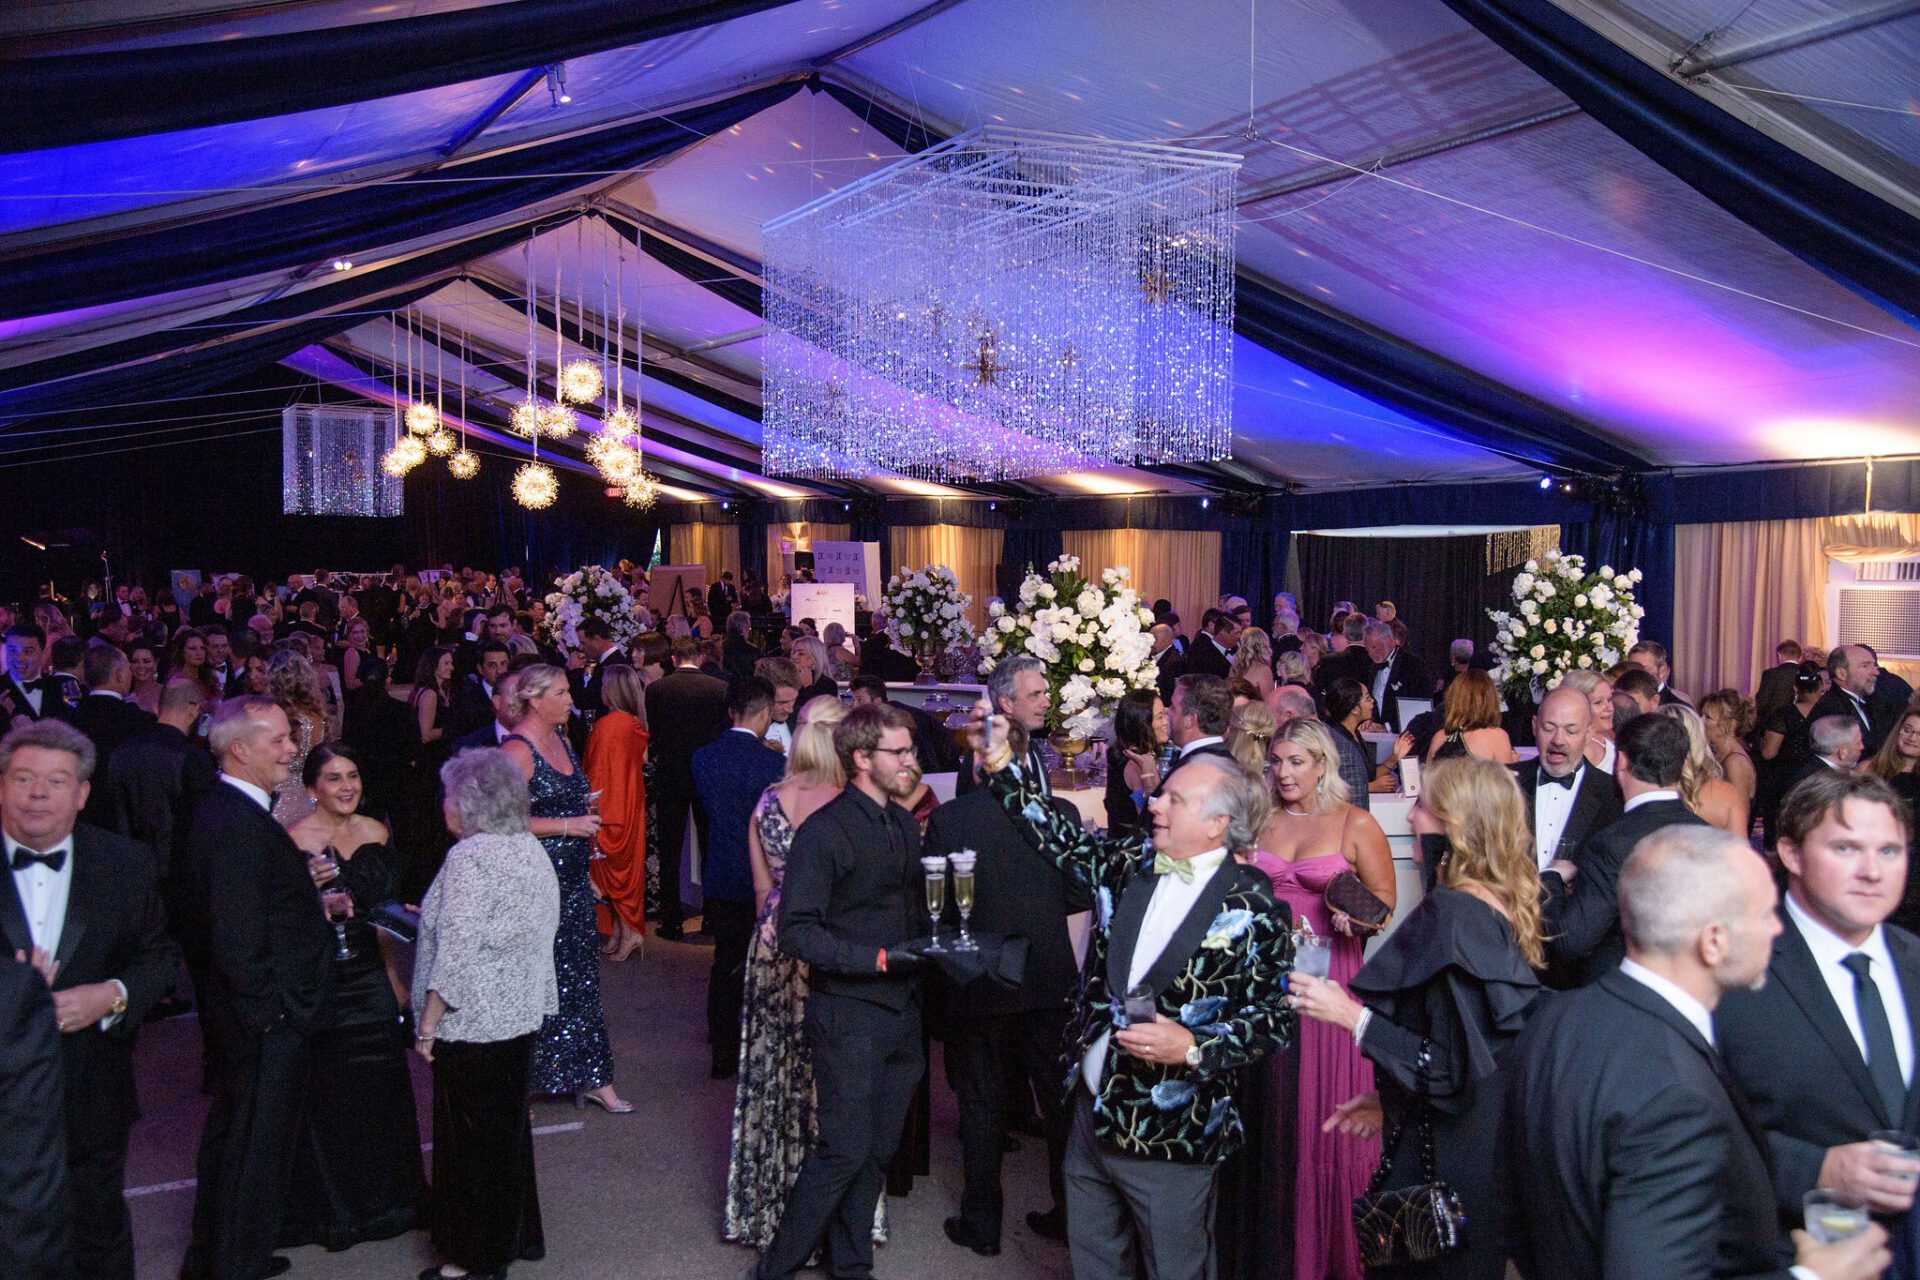 49th Annual Heritage Ball Cocktail crowd - Photo credit Kris Rae Photography.